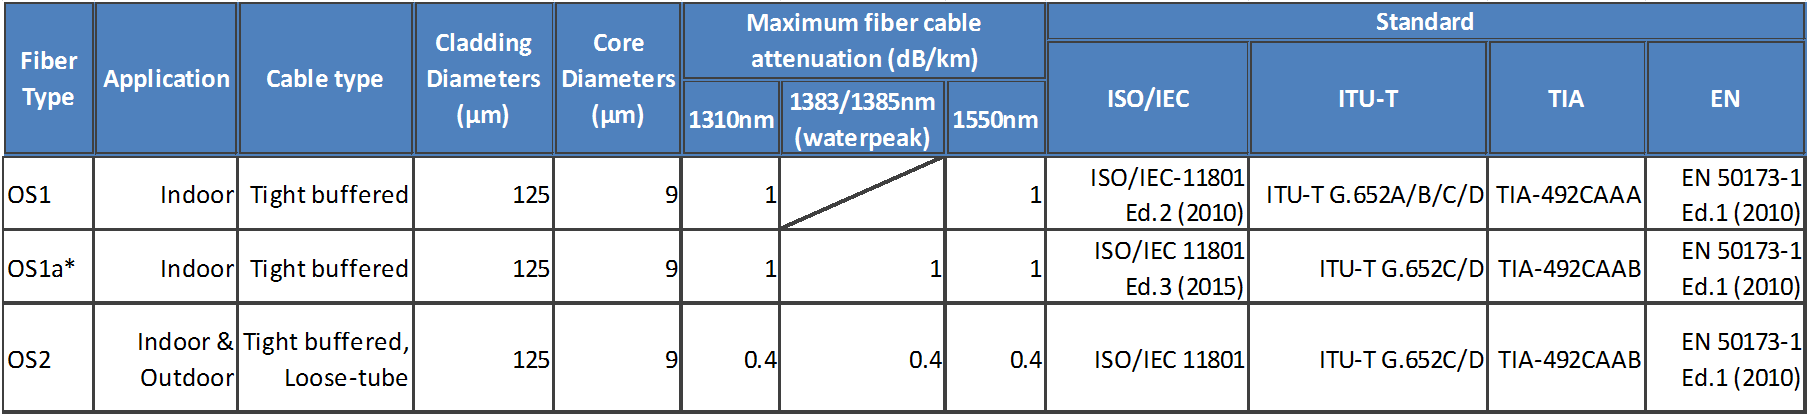 fiber-checkpoint-3-Table-2